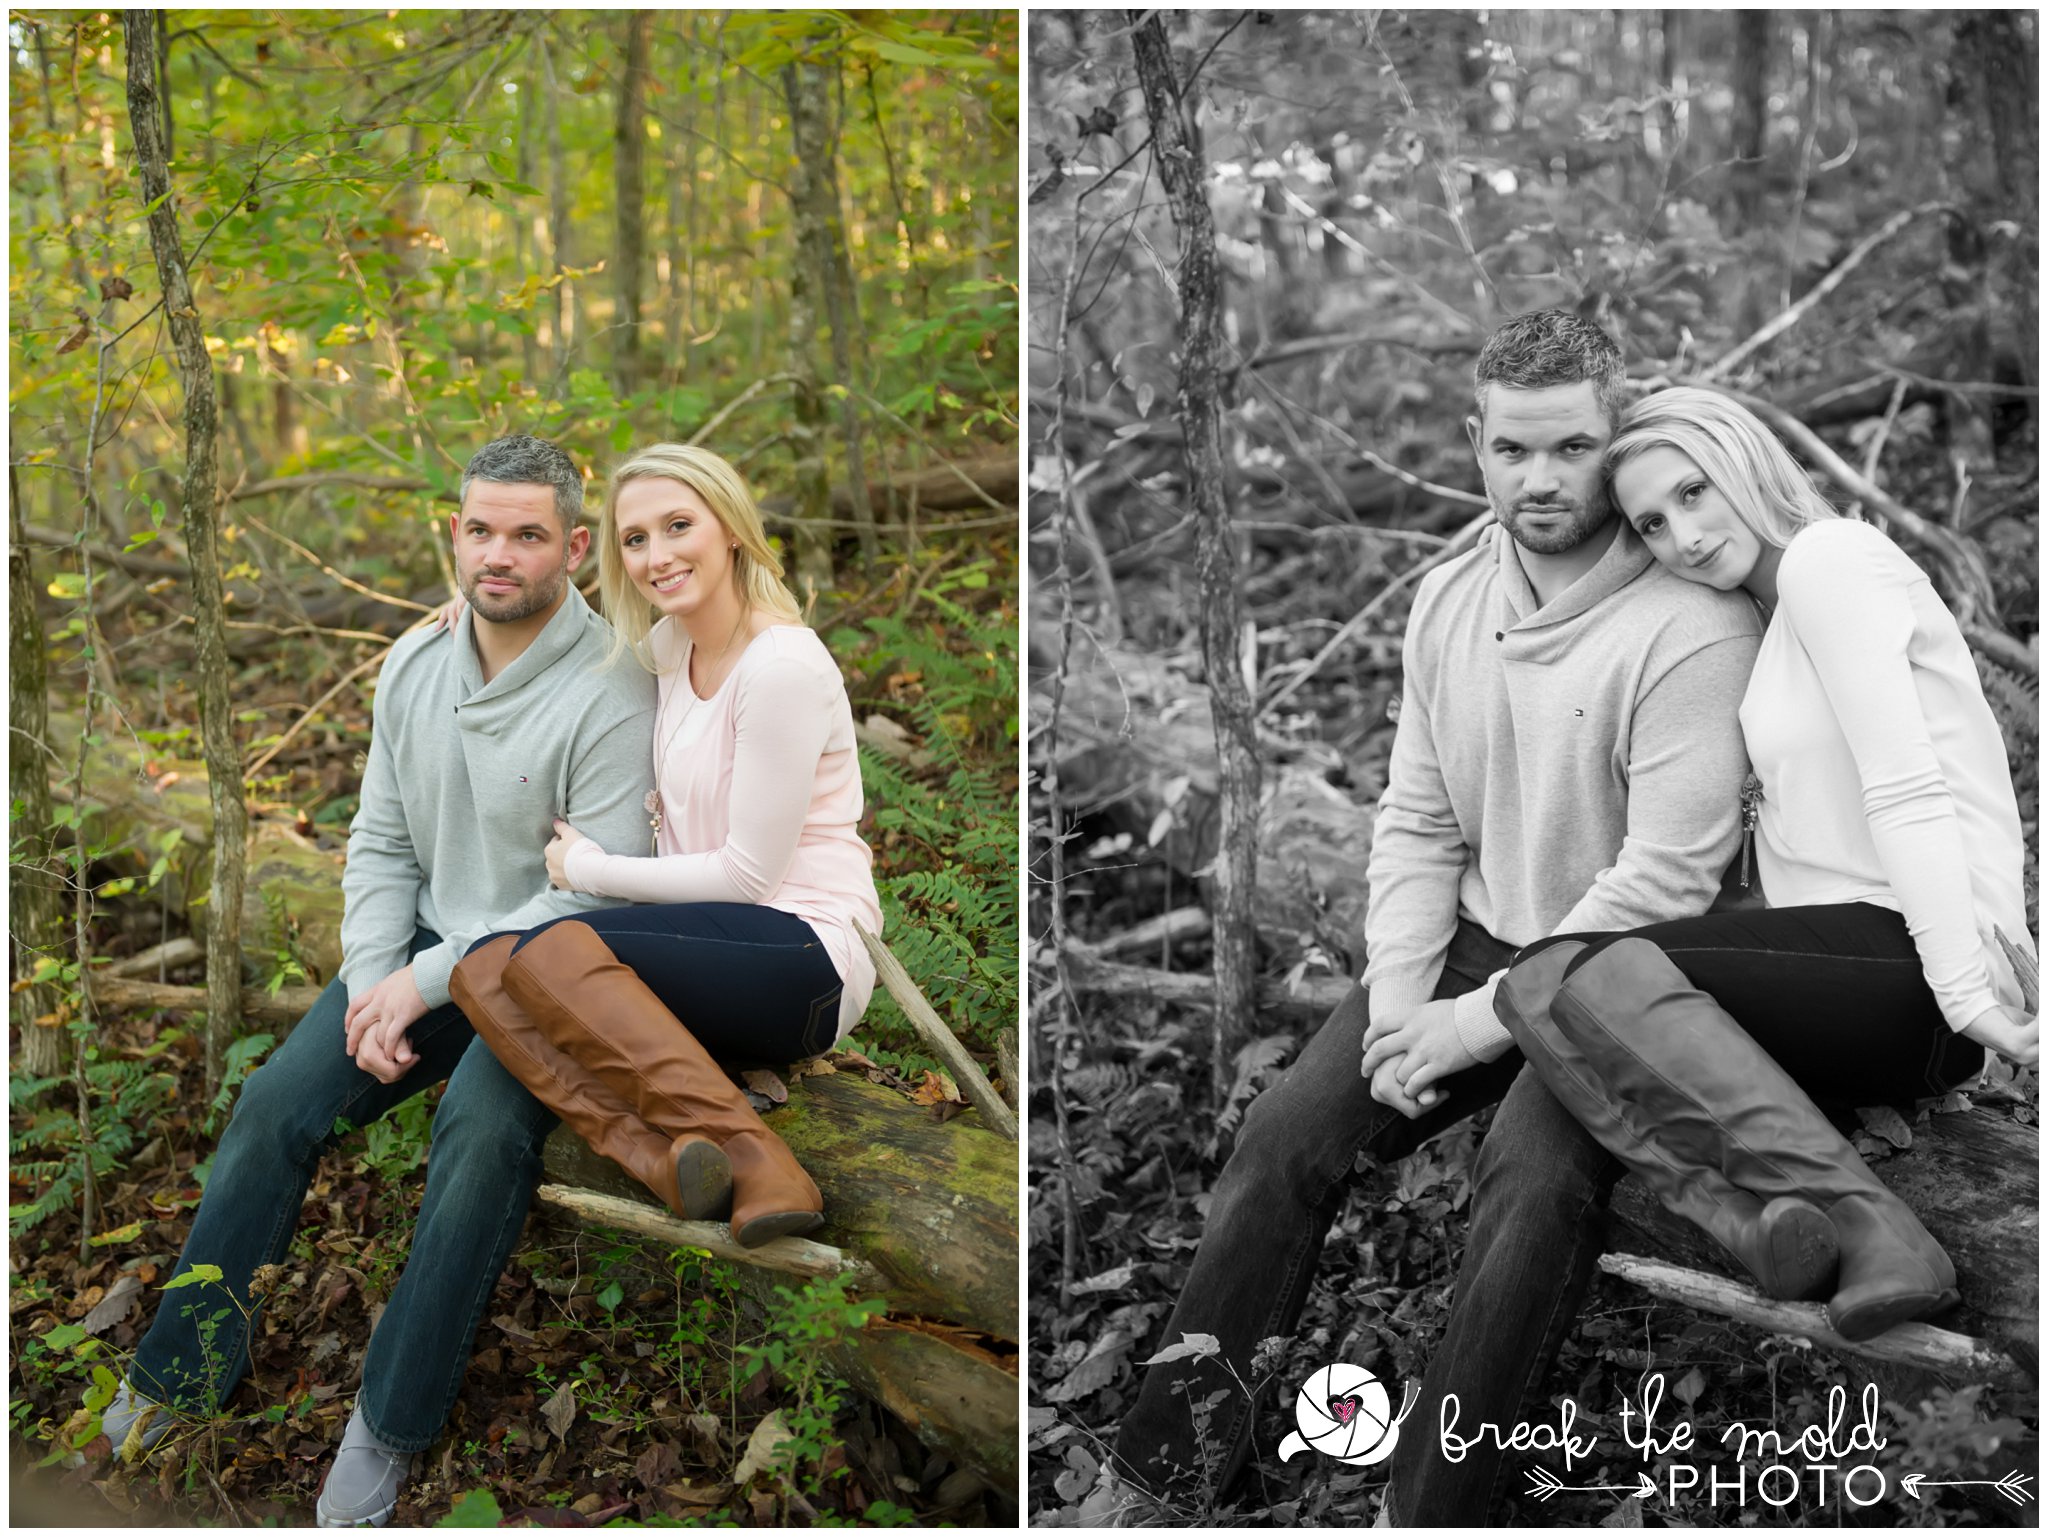 break-the-mold-photo-knoxville-tn-lenoir-city-downtown-outdoor-hiking-engagement-session_2002.jpg